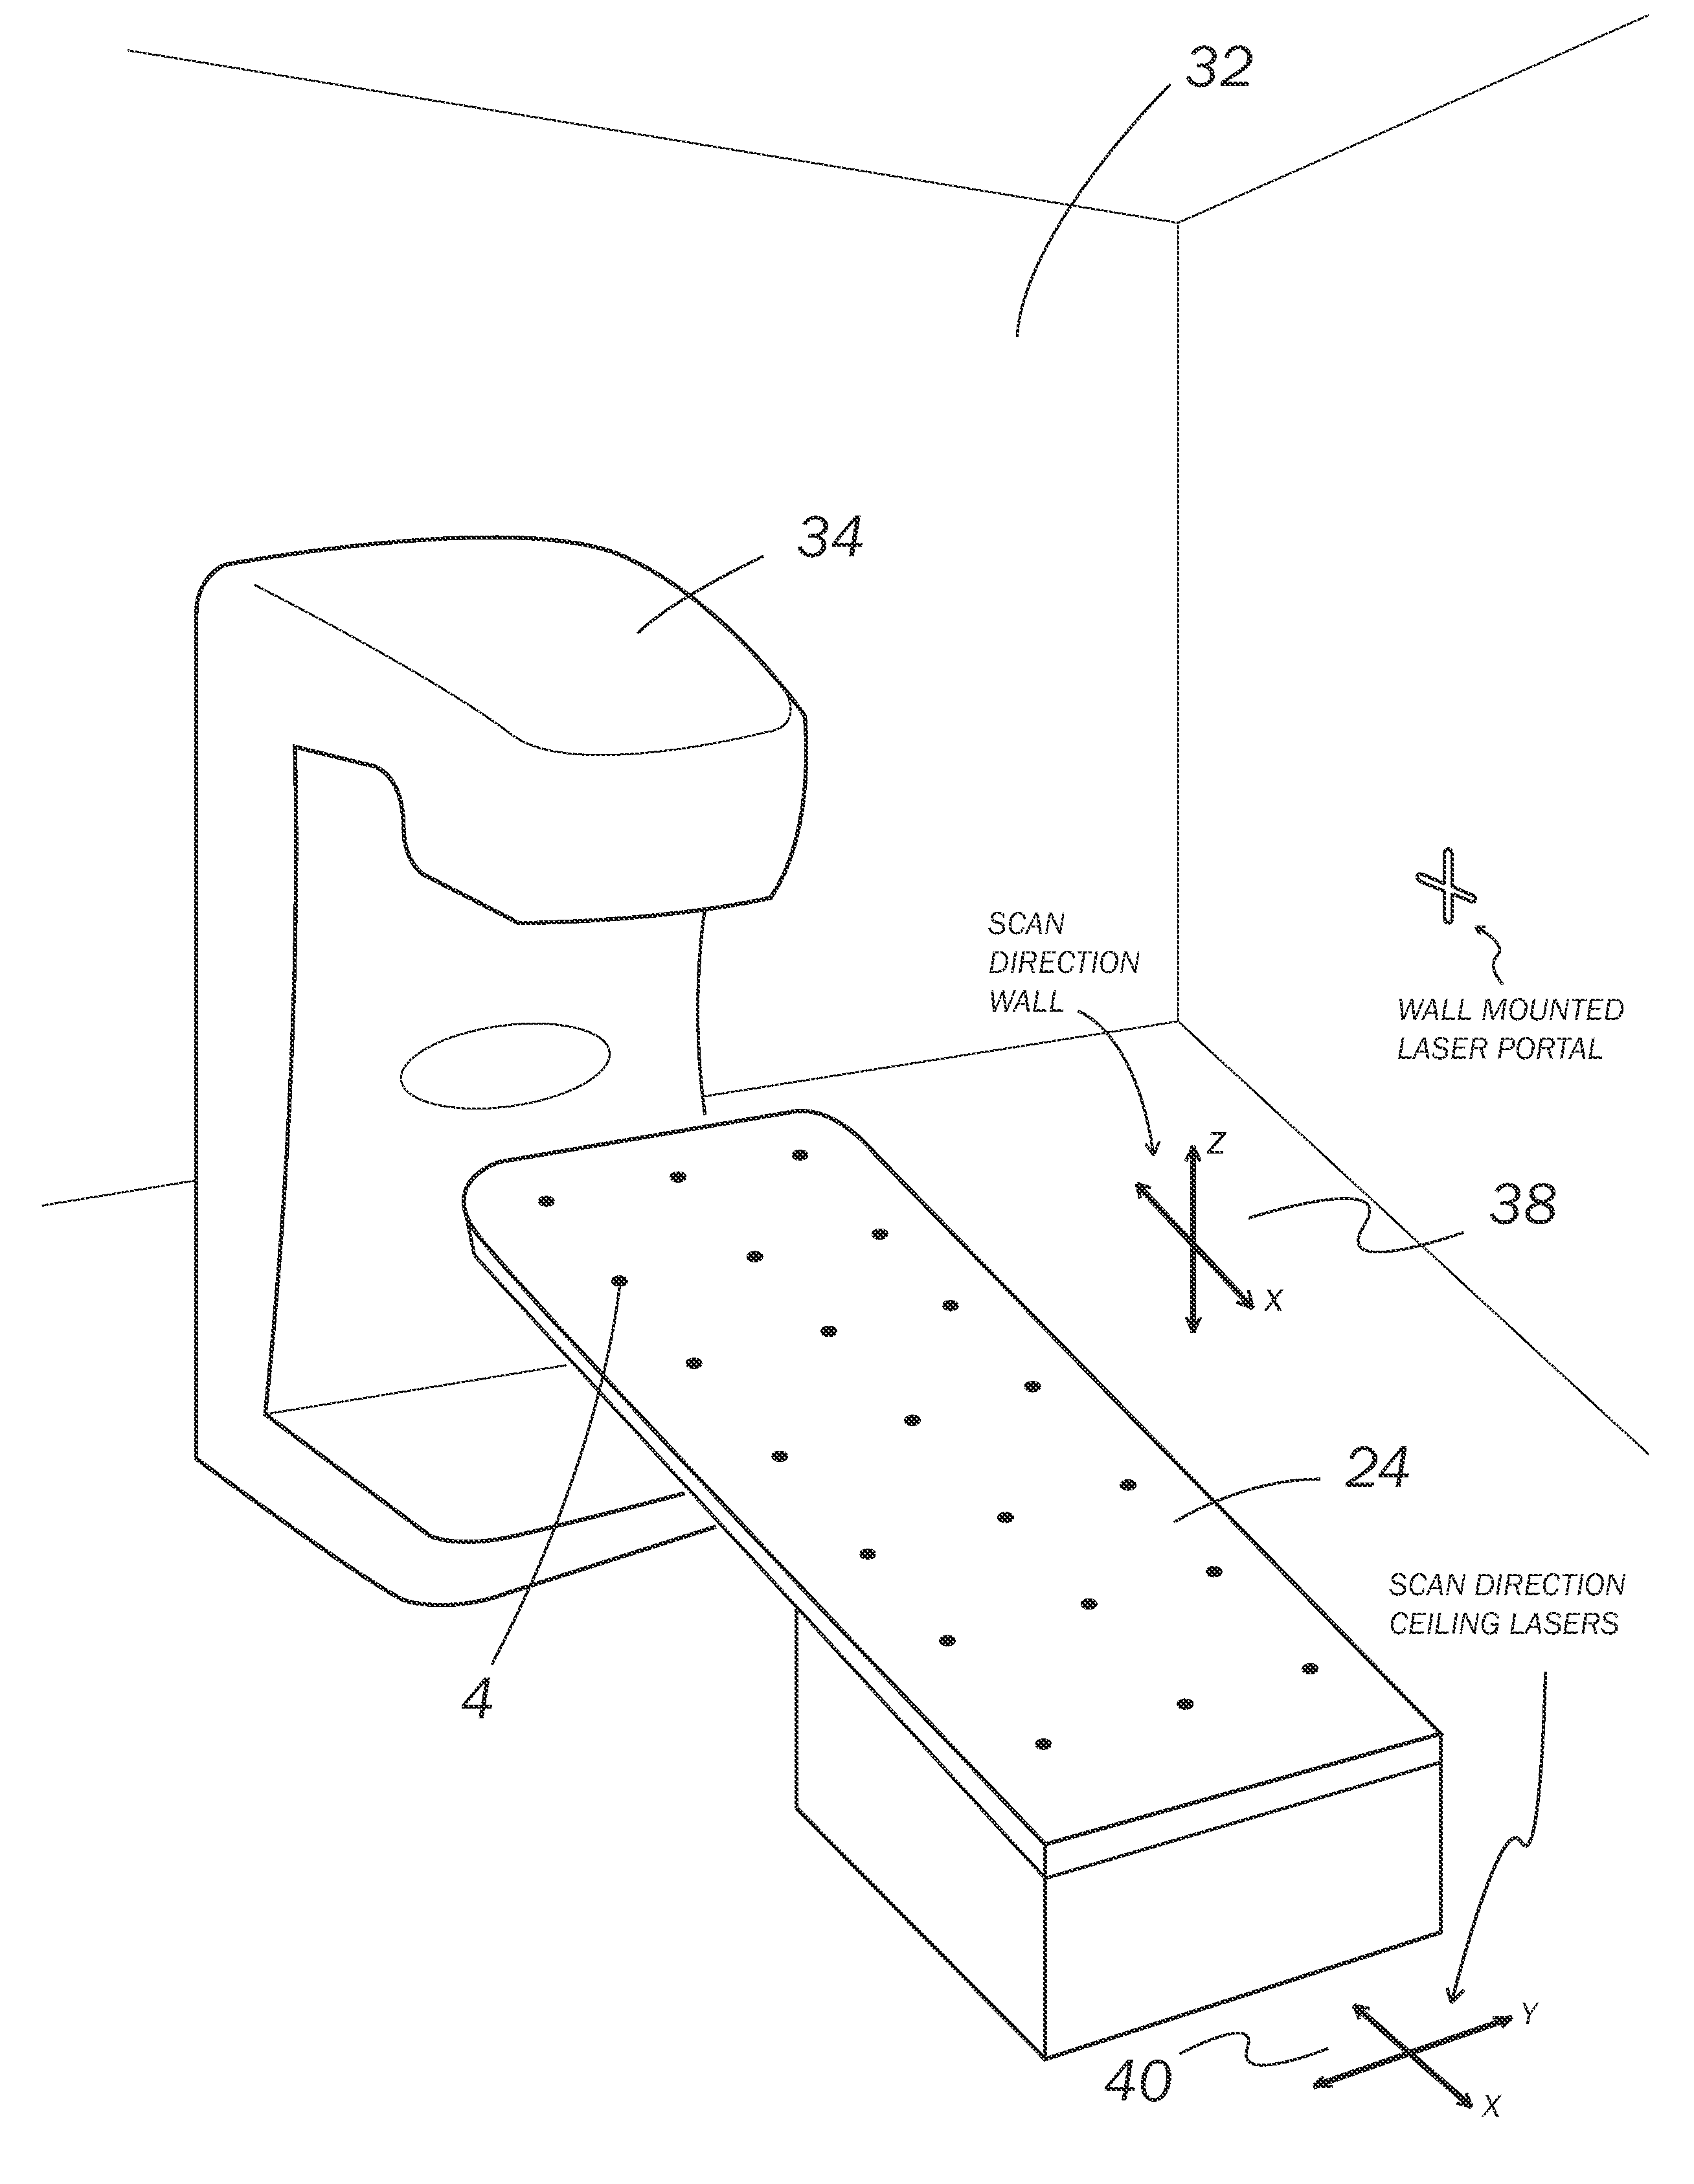 Method for Creating 3D Coordinate Systems in Image Space for Device and Patient Table Location and Verification